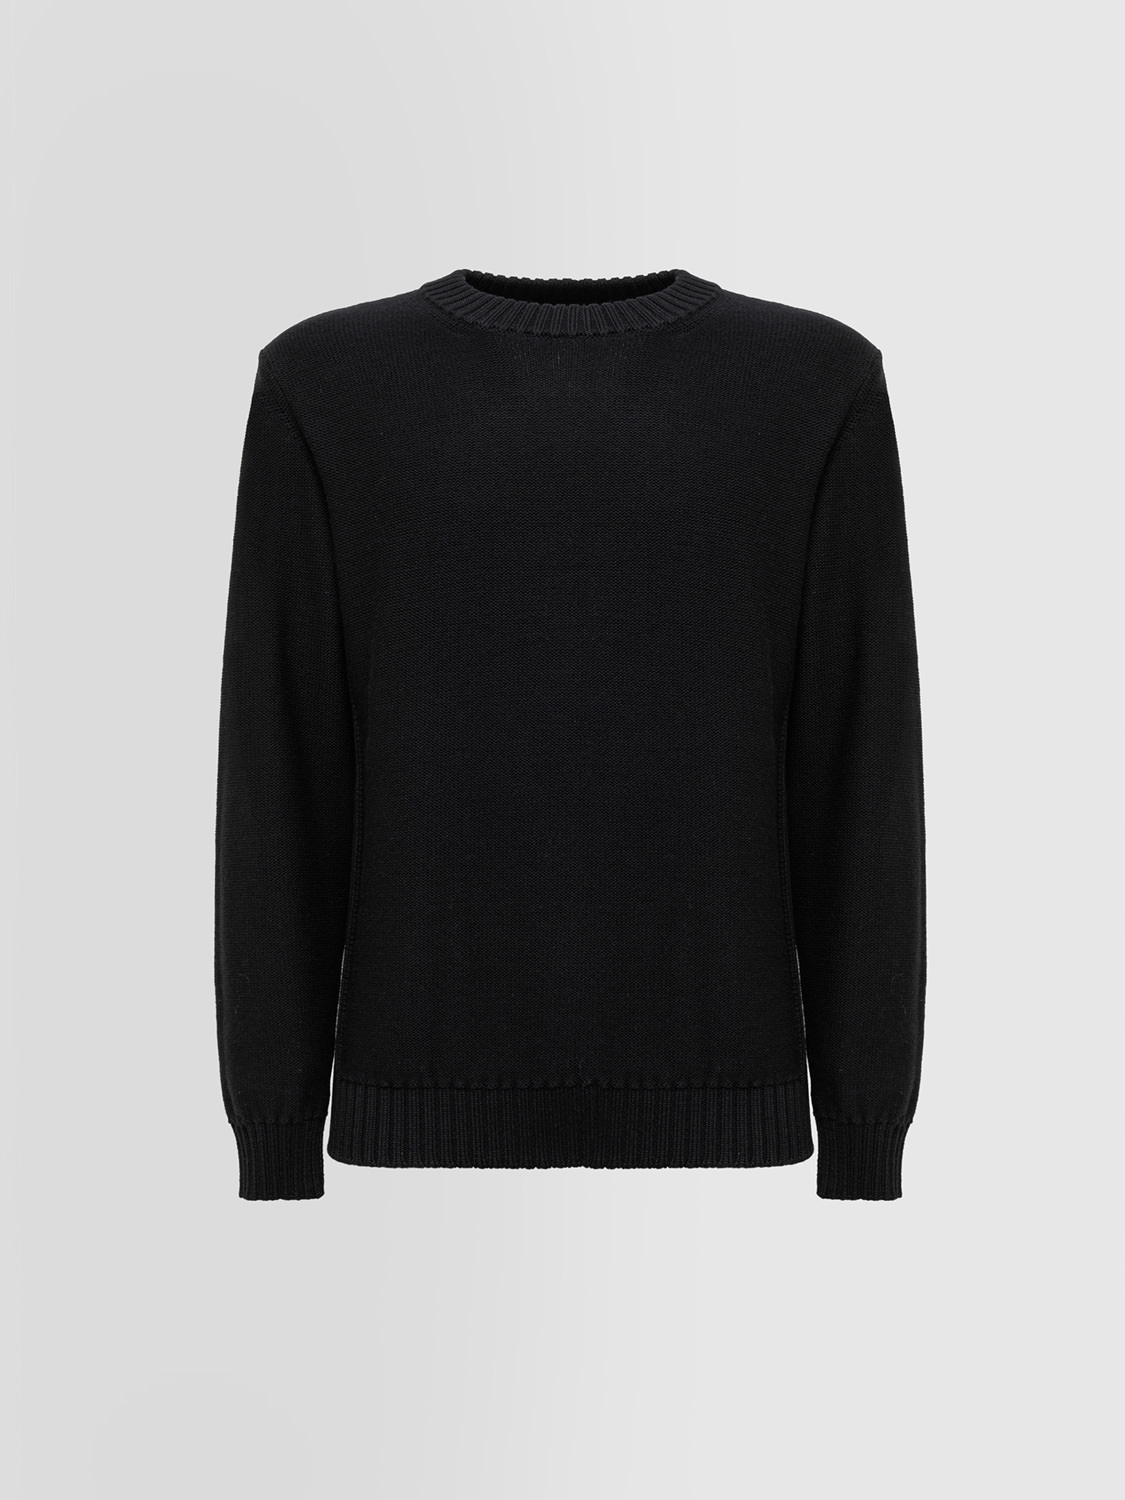 ALPHA STUDIO: CREW NECK WITH BUTTONS